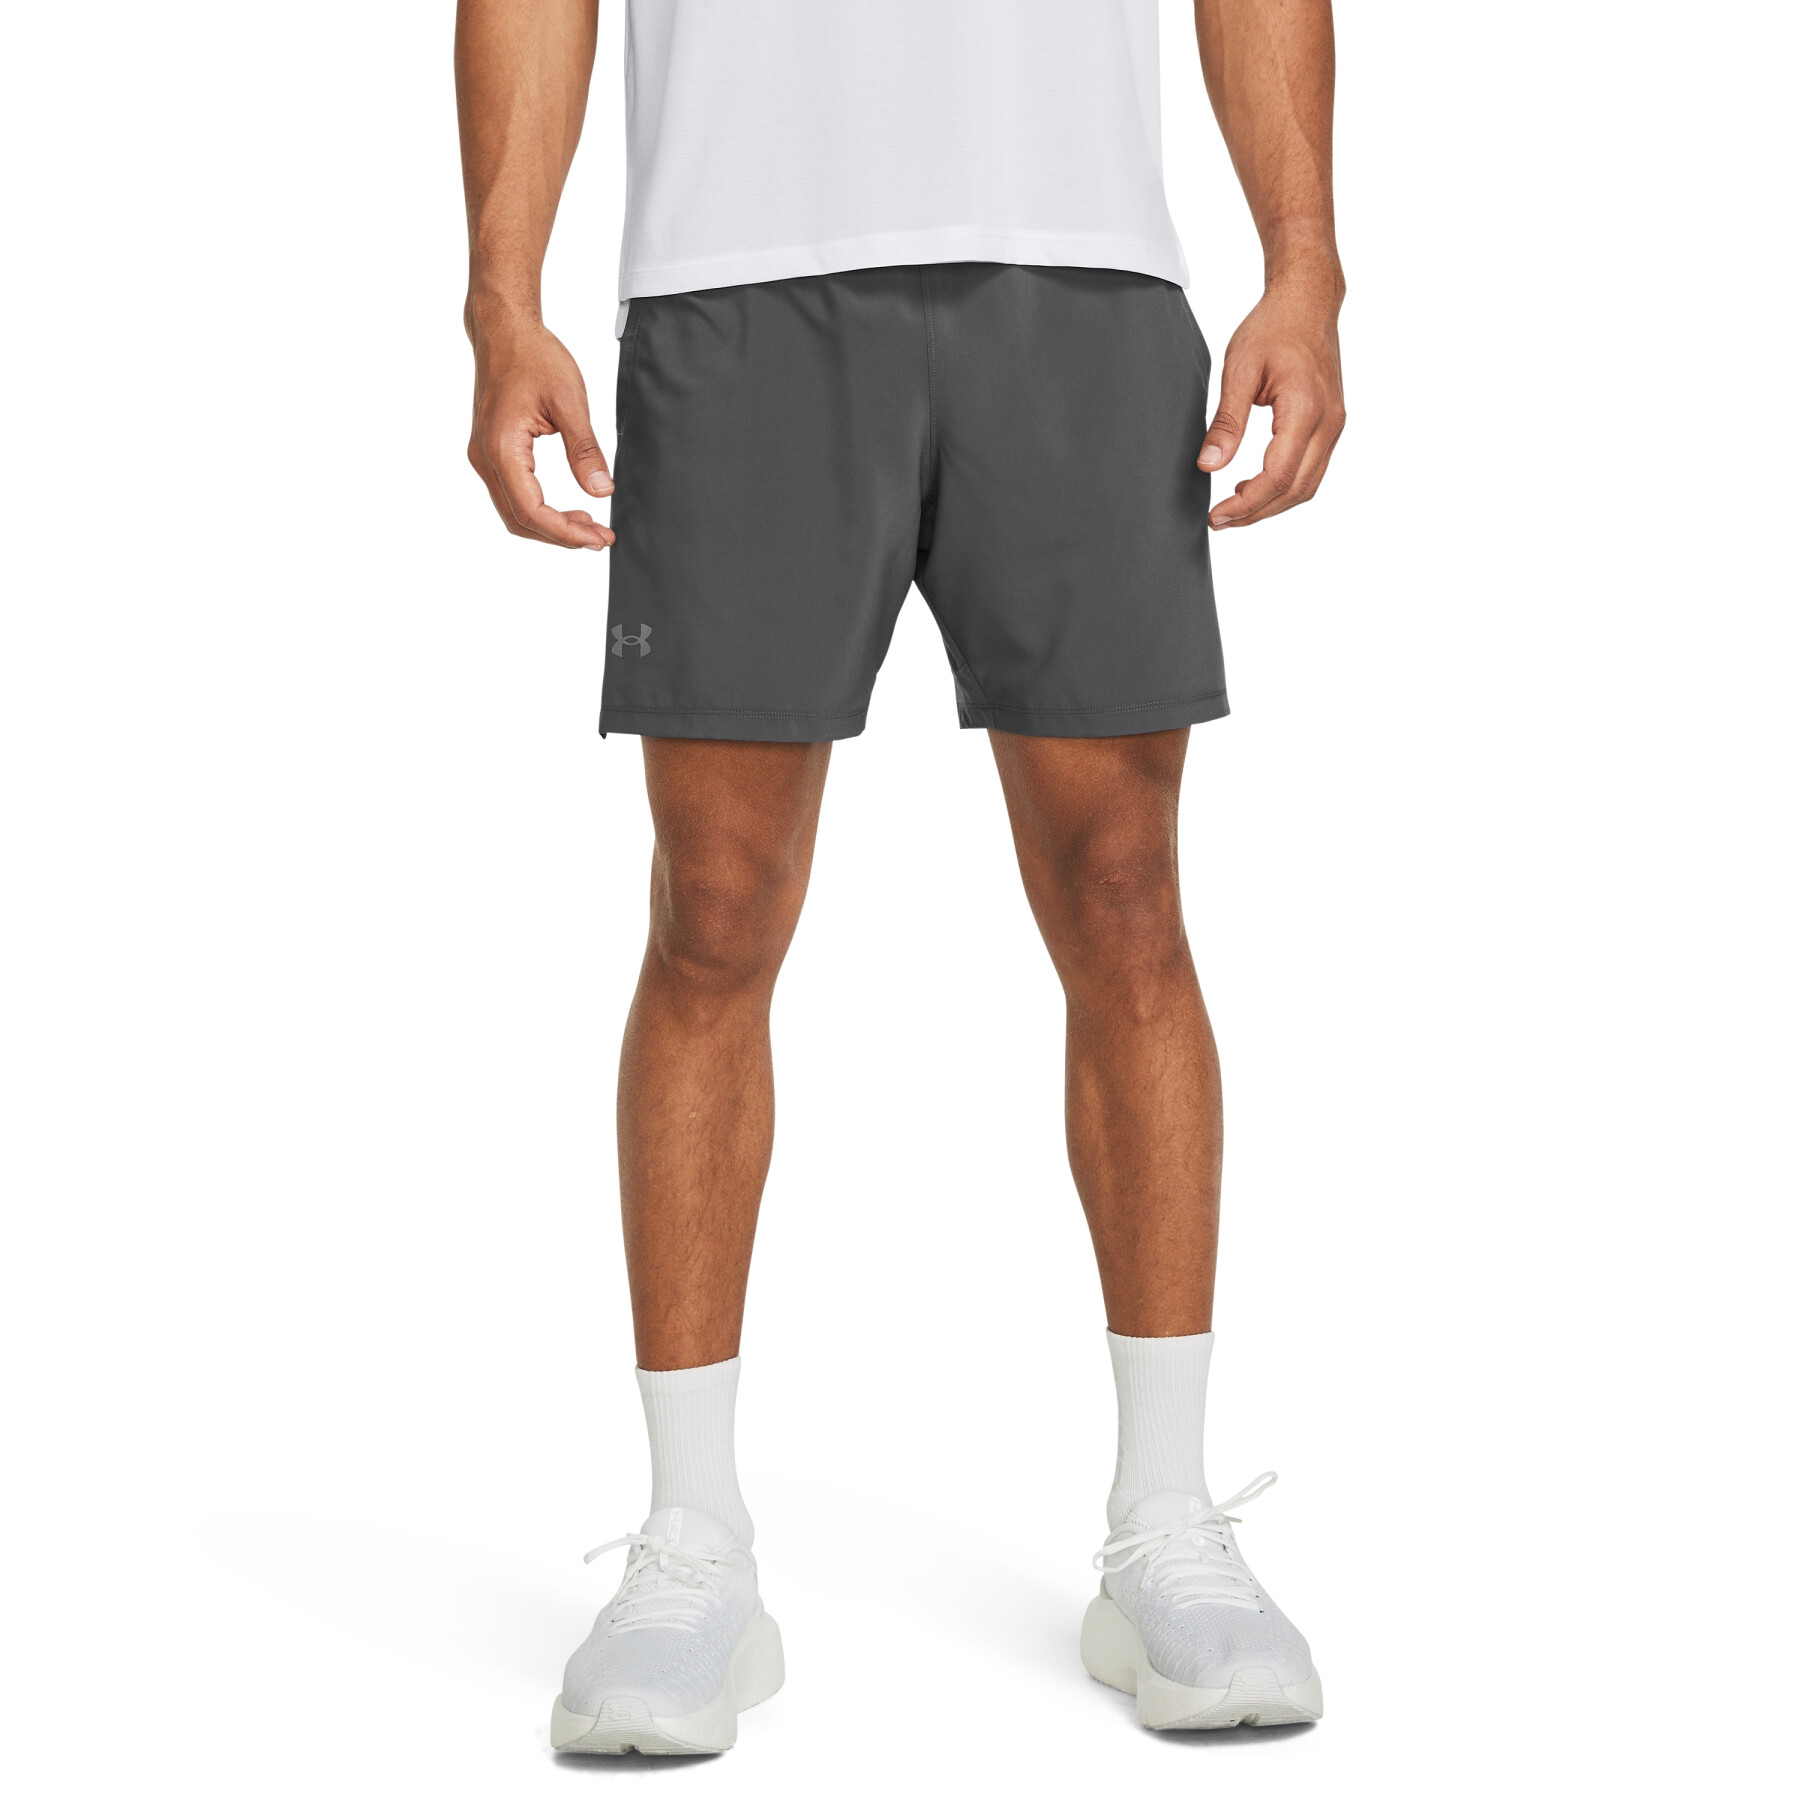 2 in 1 shorts Under Armour Launch Elite 7"